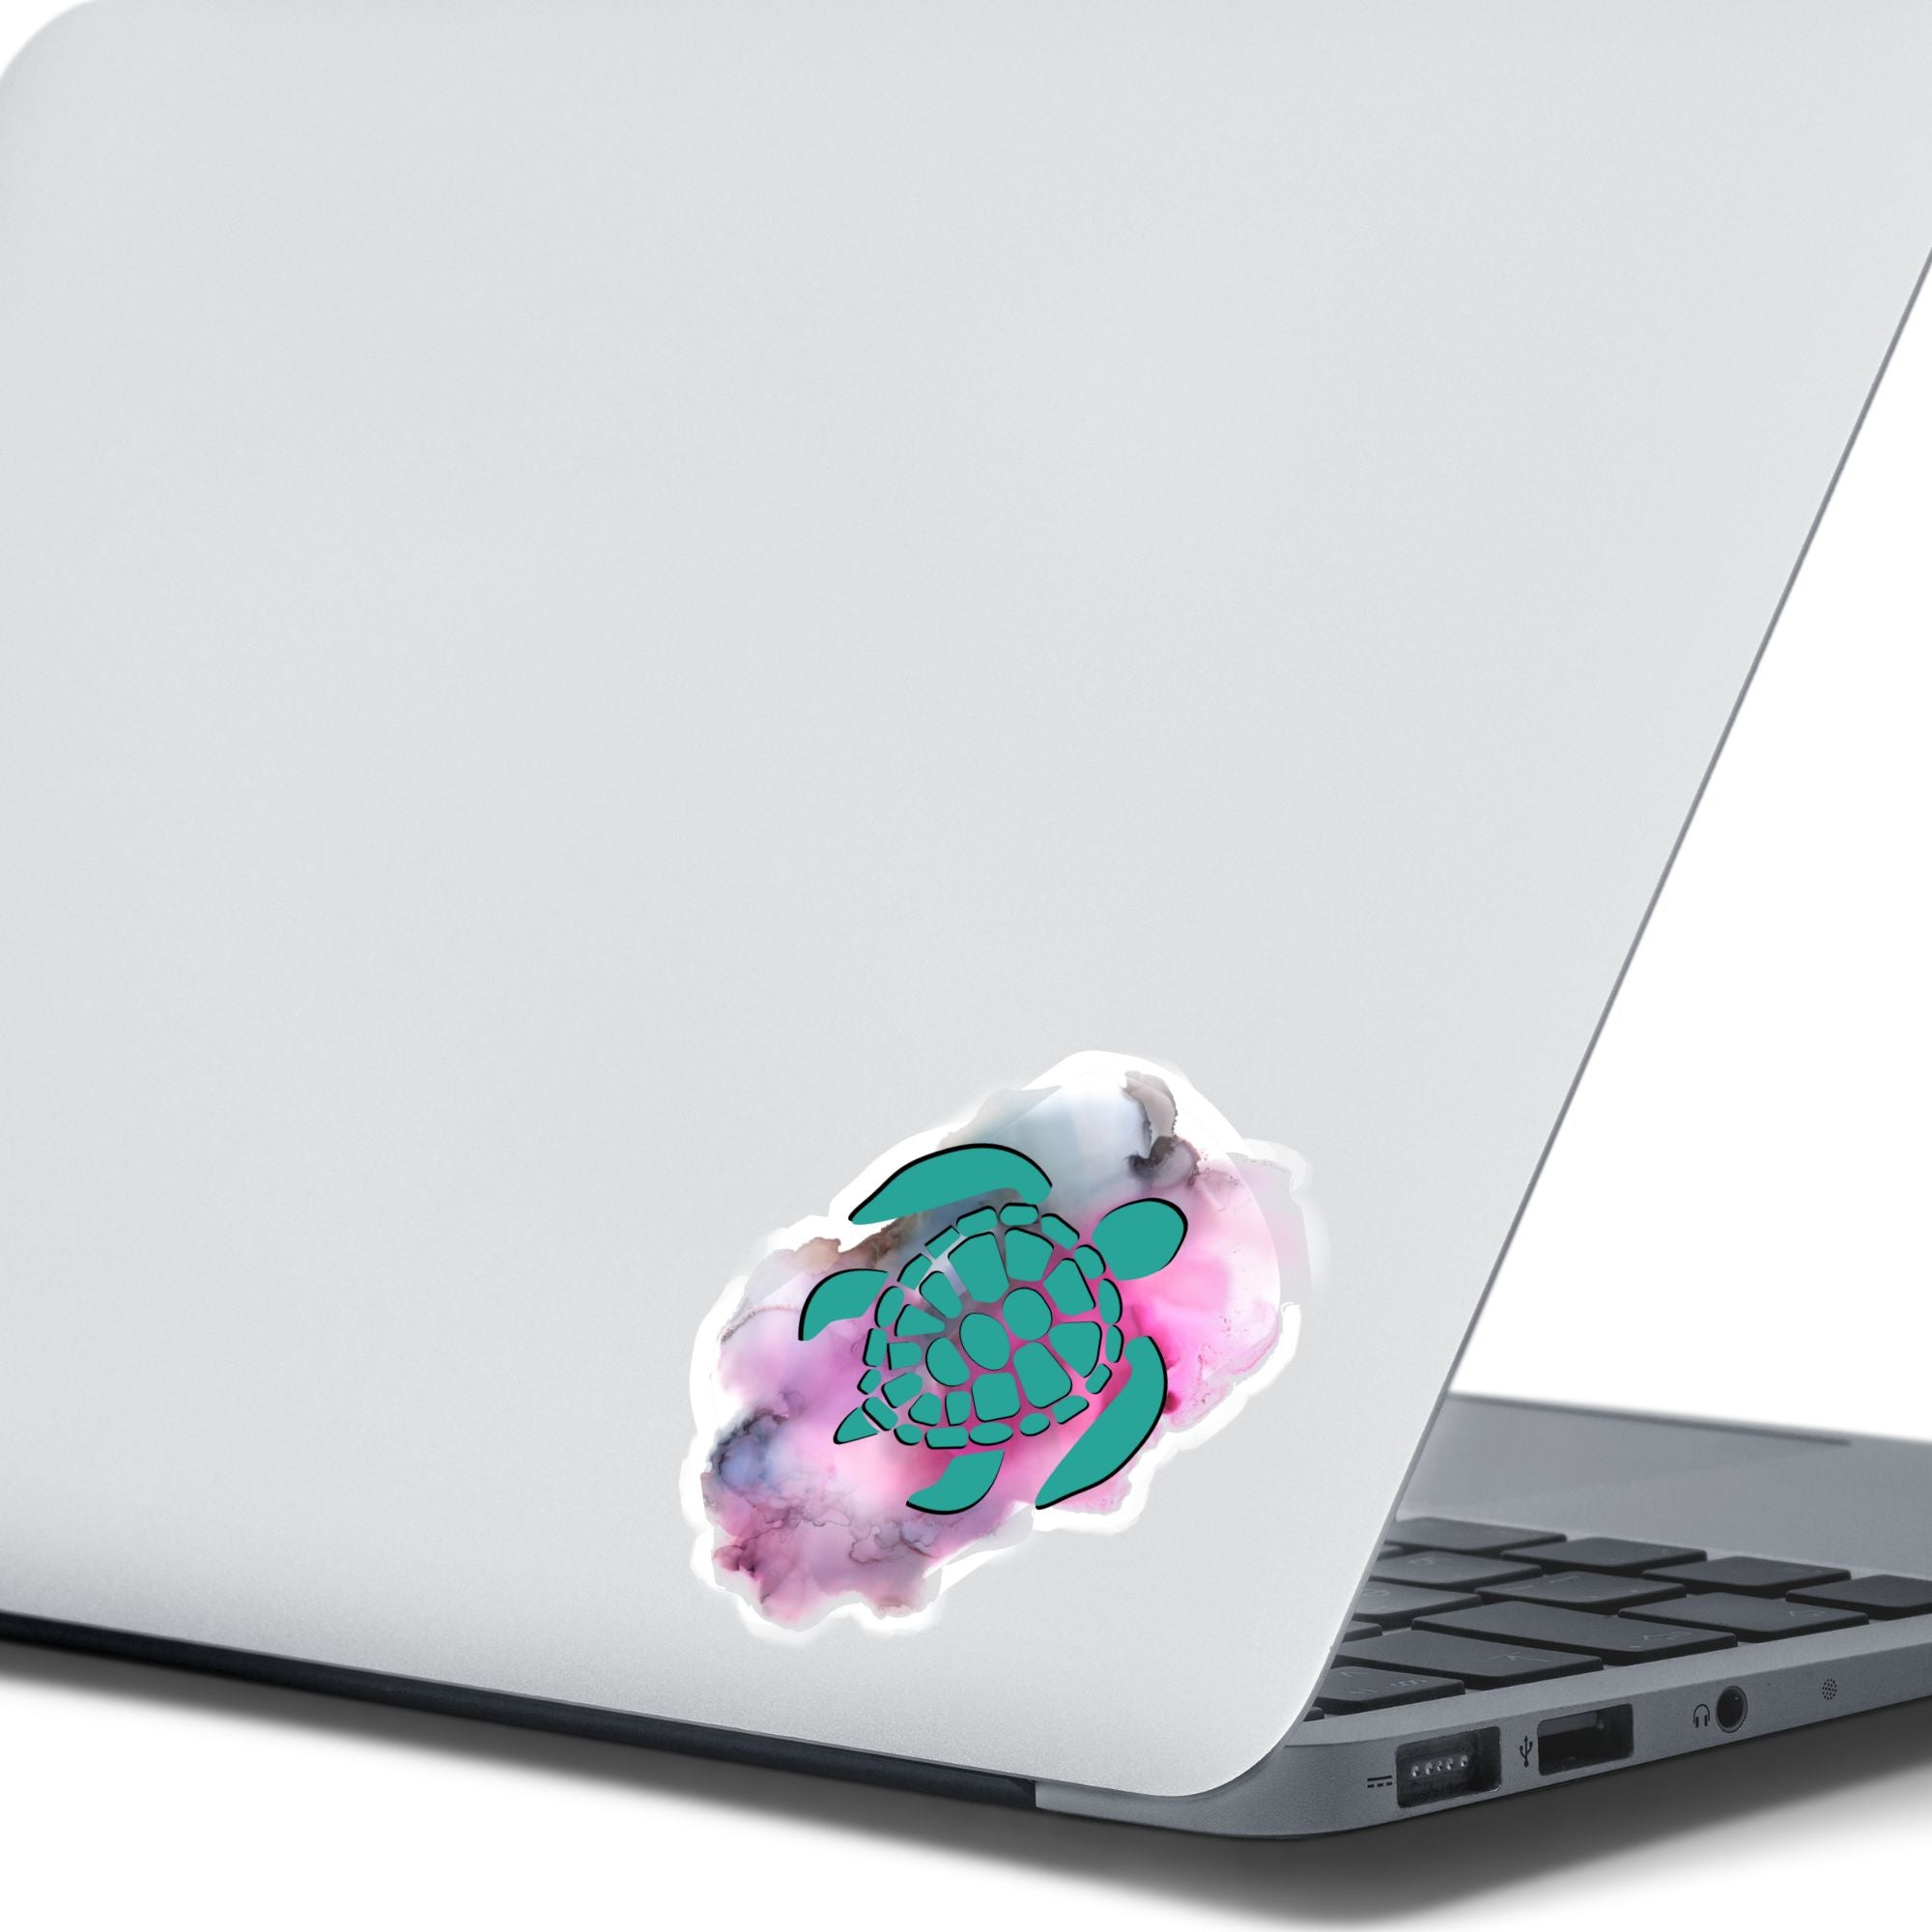 his individual die-cut sticker features a green tribal style turtle on a gray and pink cloudy background. This image shows the turtle sticker on the back of an open laptop.